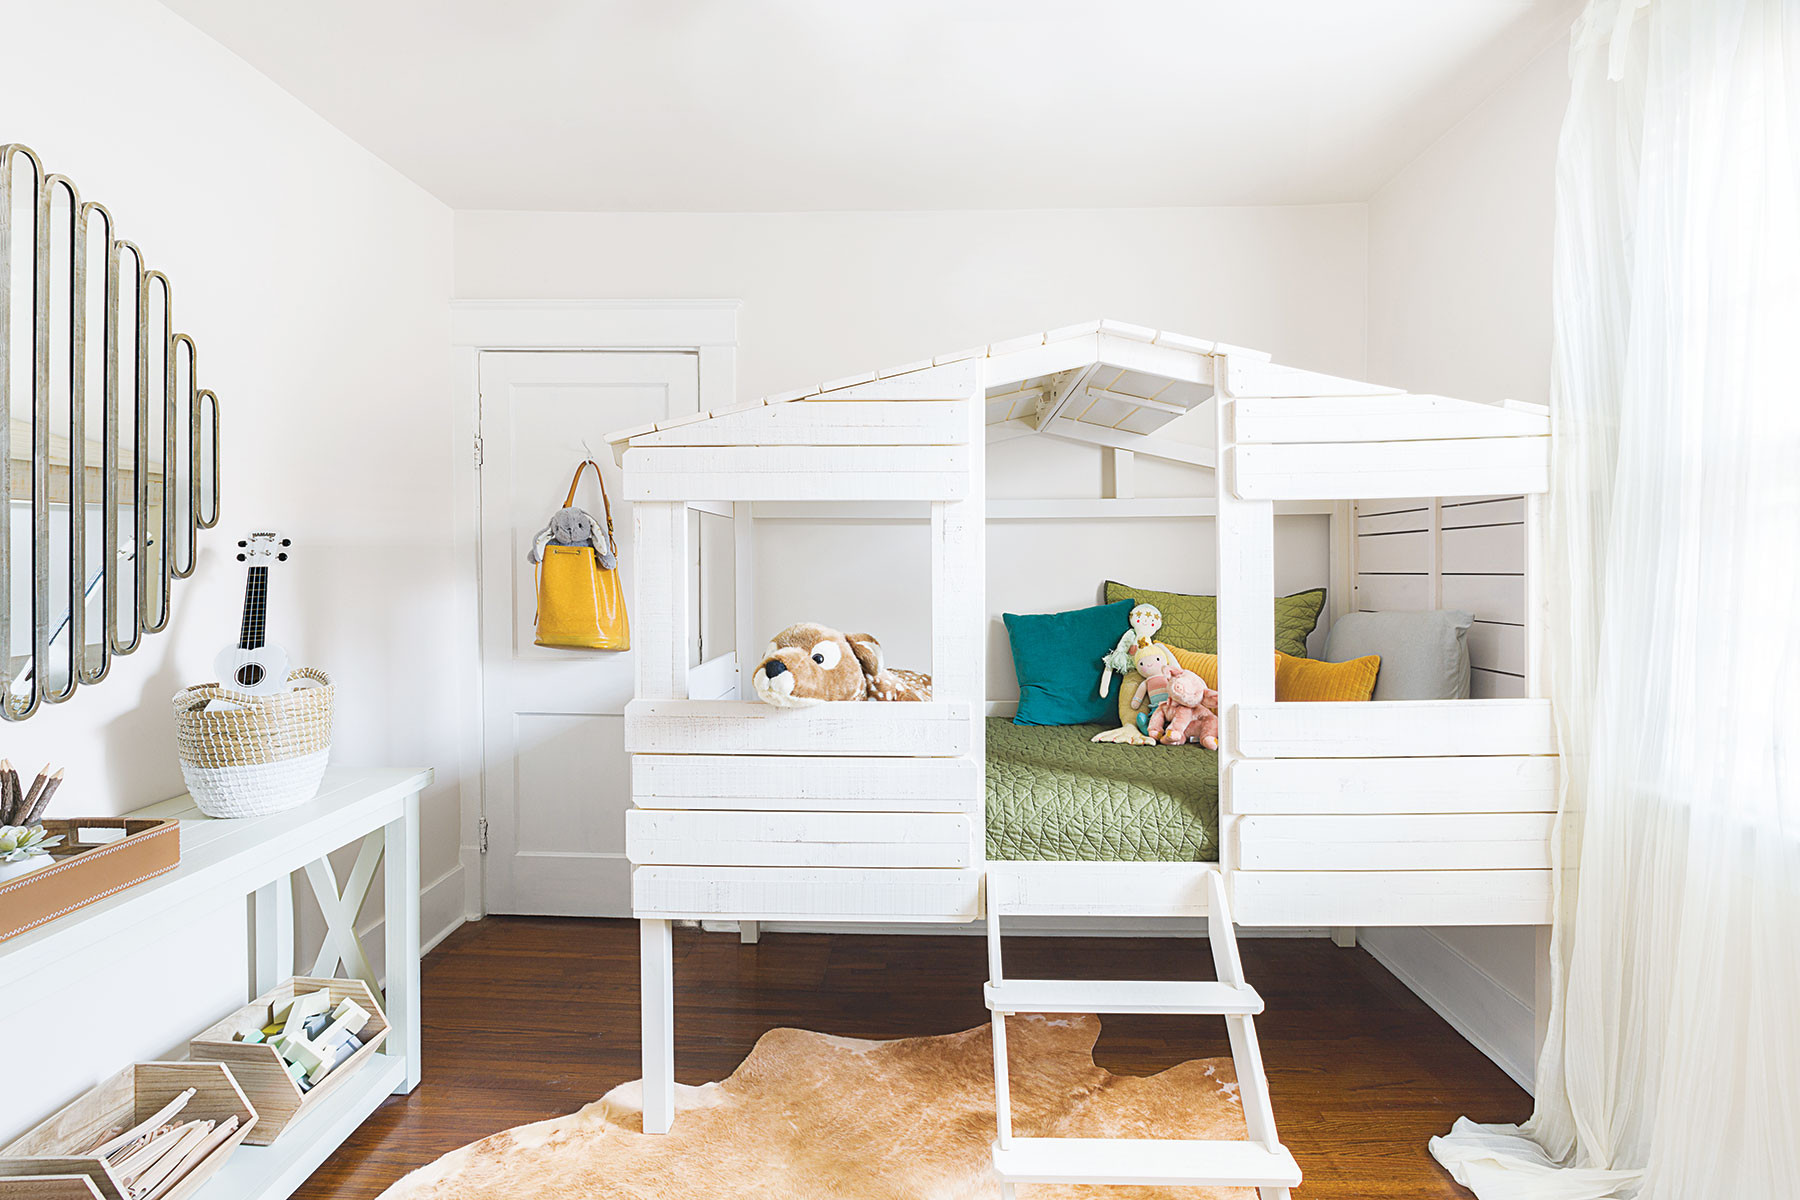 Room Decor For Kids
 Decor Ideas for a Kid’s Room Real Simple